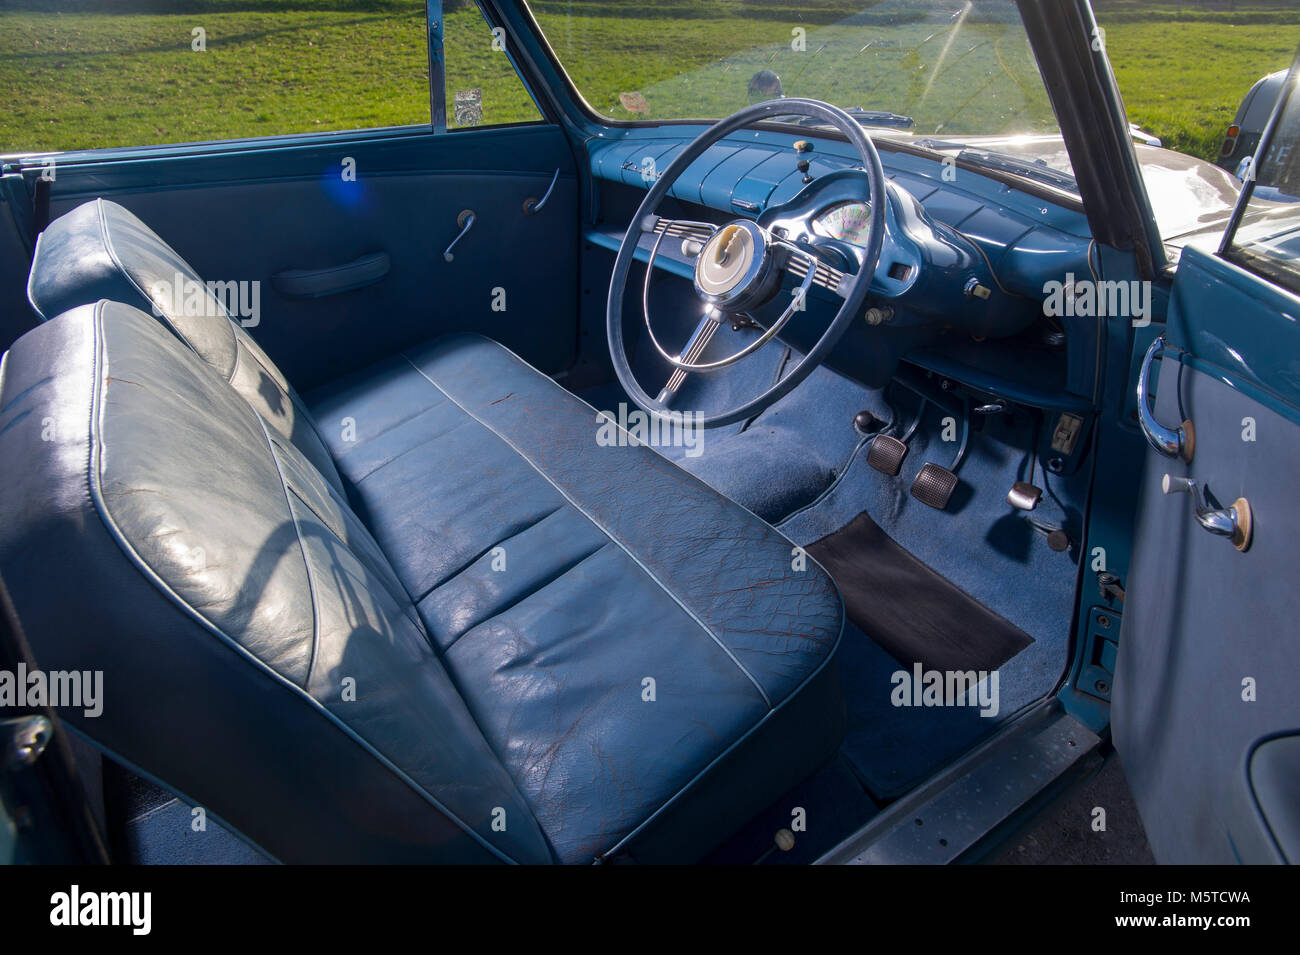 1955 Ford Zephyr Consul convertible, British family car Stock Photo - Alamy